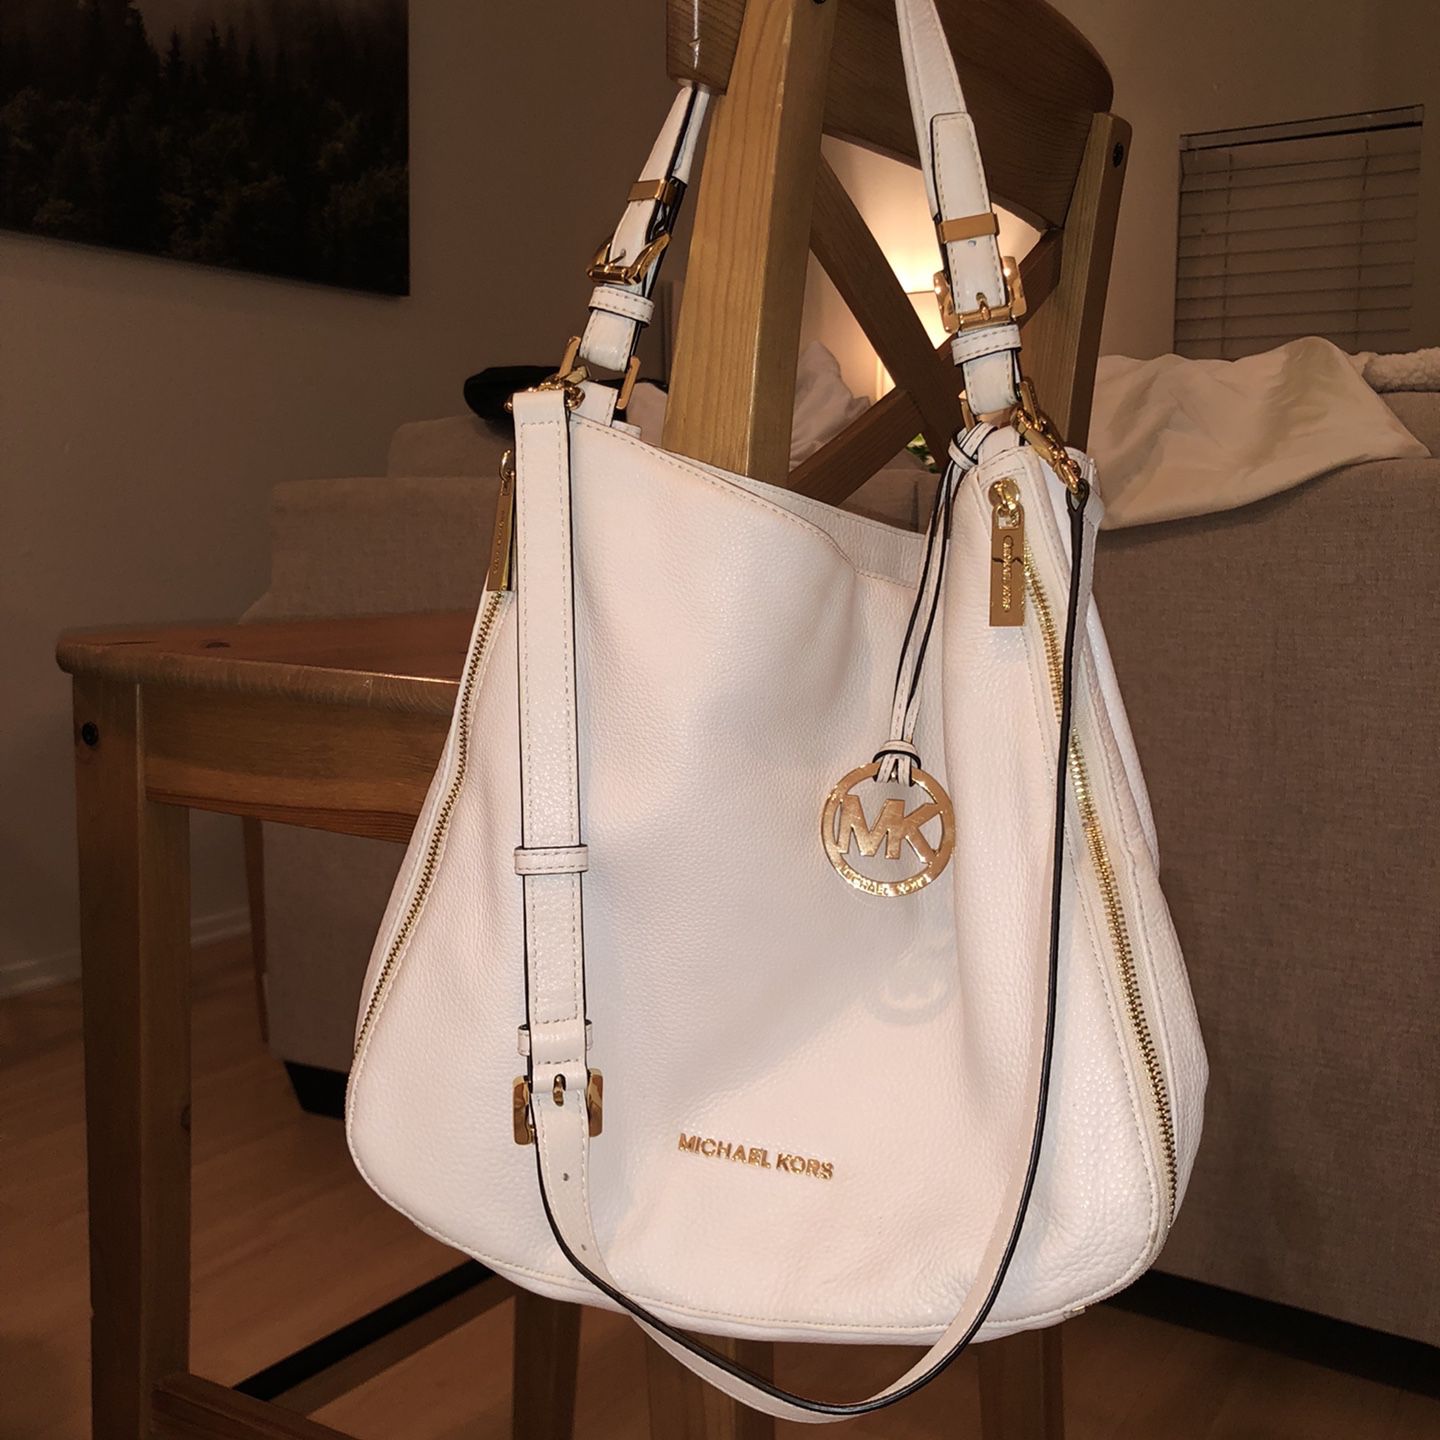 Michael Kors White Leather Bag / Purse with Gold Hardware